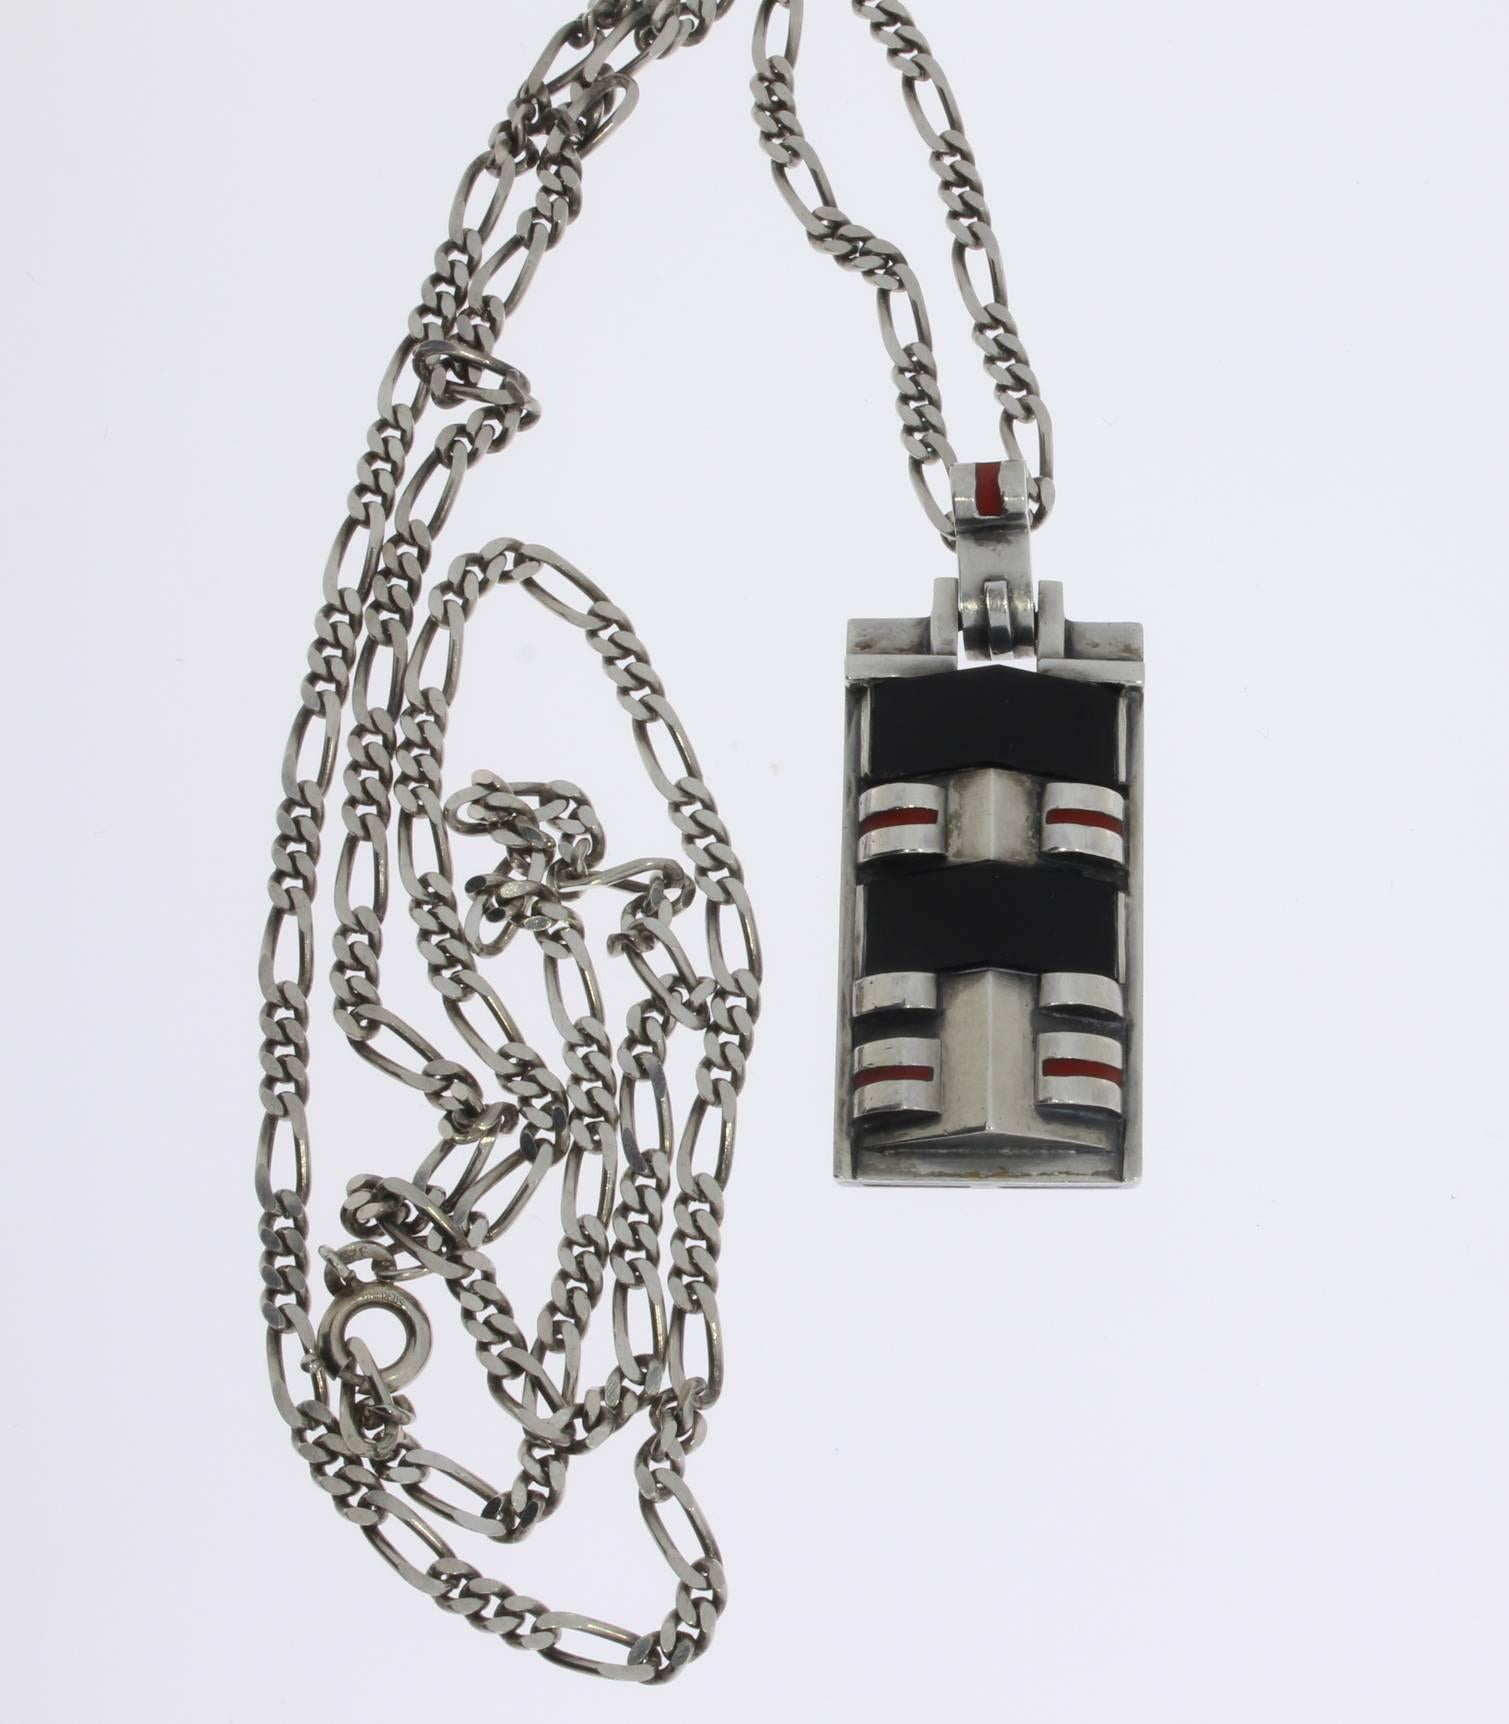 Art Deco Silver pendant with original sterling silver chain by Theodor Fahrner, Pforzheim circa 1927. Decorated with onyx and coral. Enamelled. Hallmarked: TF 935. Chain marked with STERLING. Total weight without chain: 14.98 g. Weight with chain: